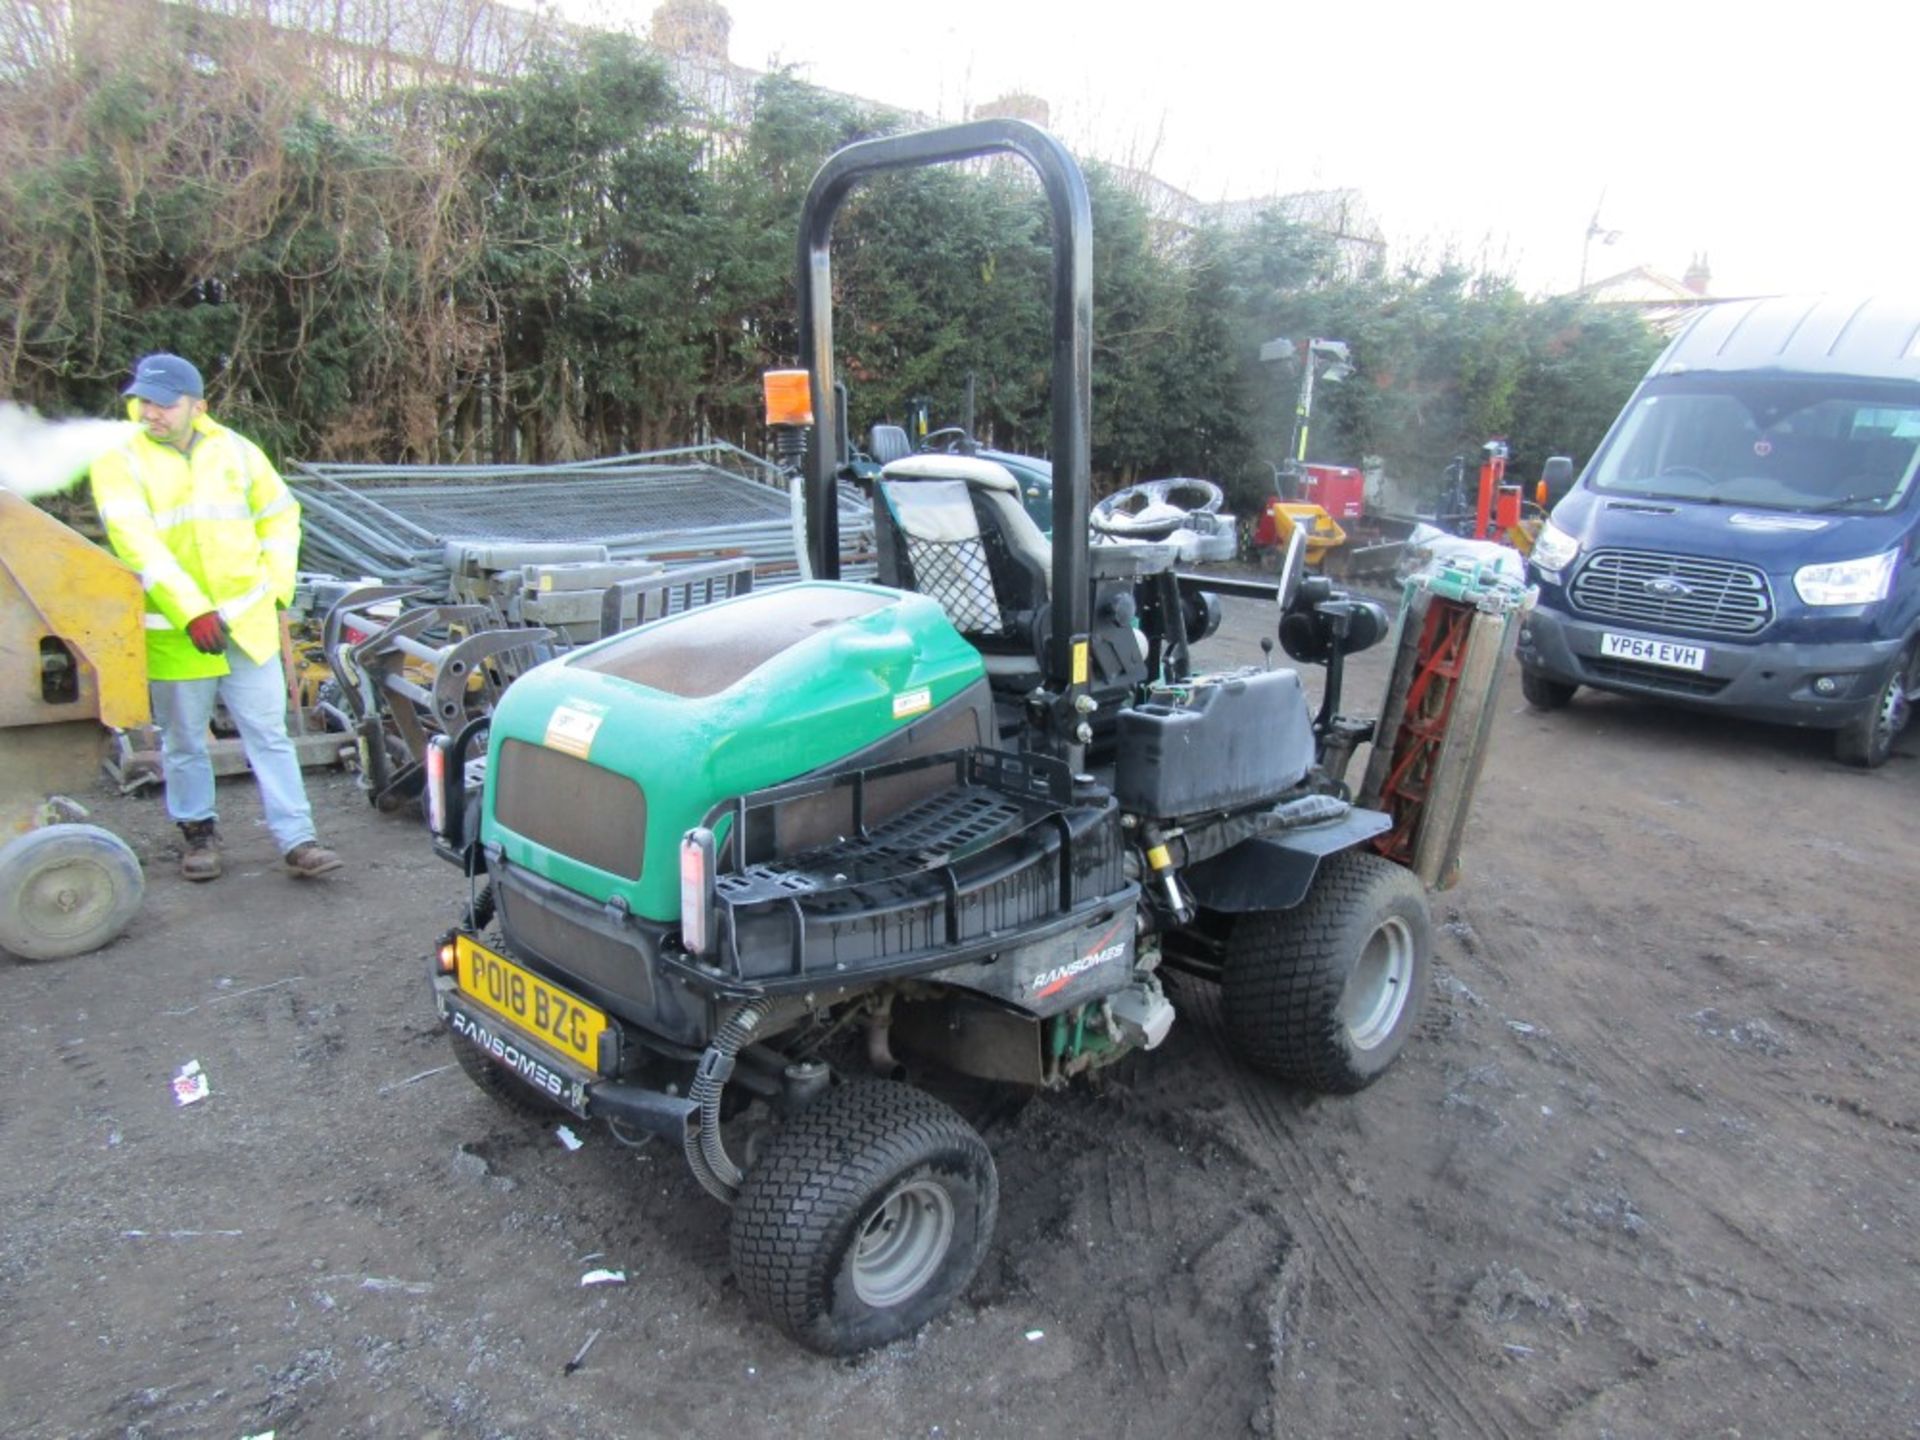 18 reg RANSOMES PARKWAY 3 TRIPLE RIDE ON MOWER (DIRECT COUNCIL) 1ST REG 05/18, 223 HOURS - Image 4 of 5